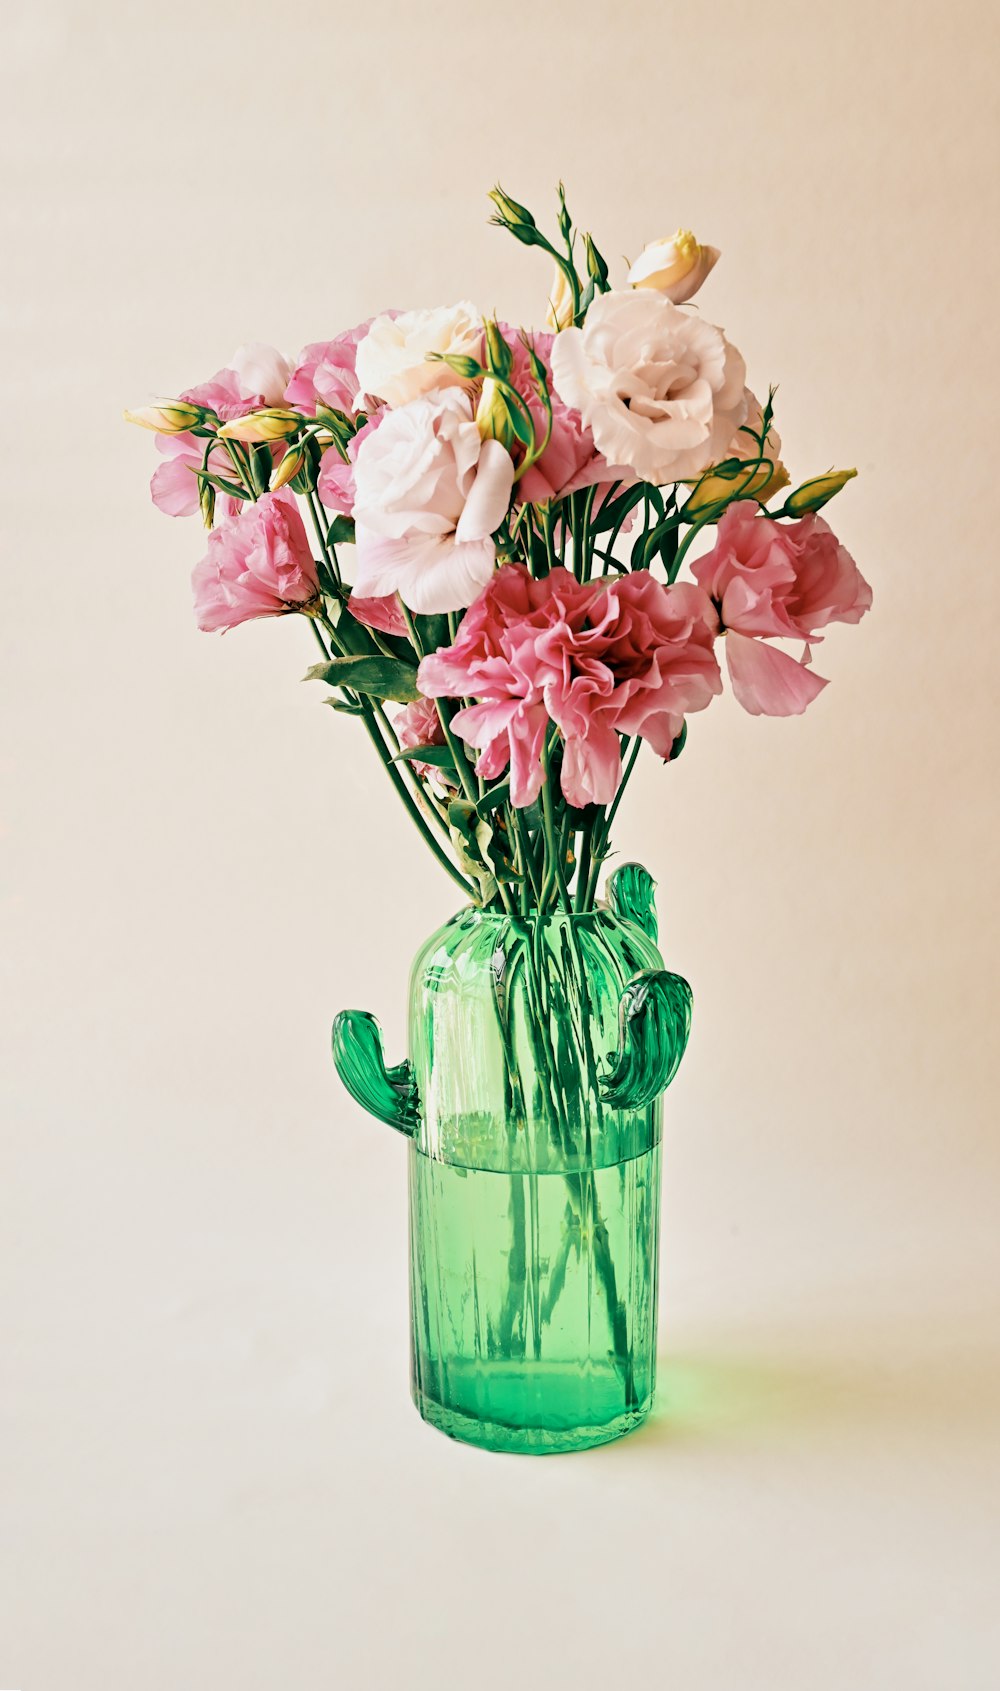 Flowers In Vase Pictures | Download Free Images on Unsplash